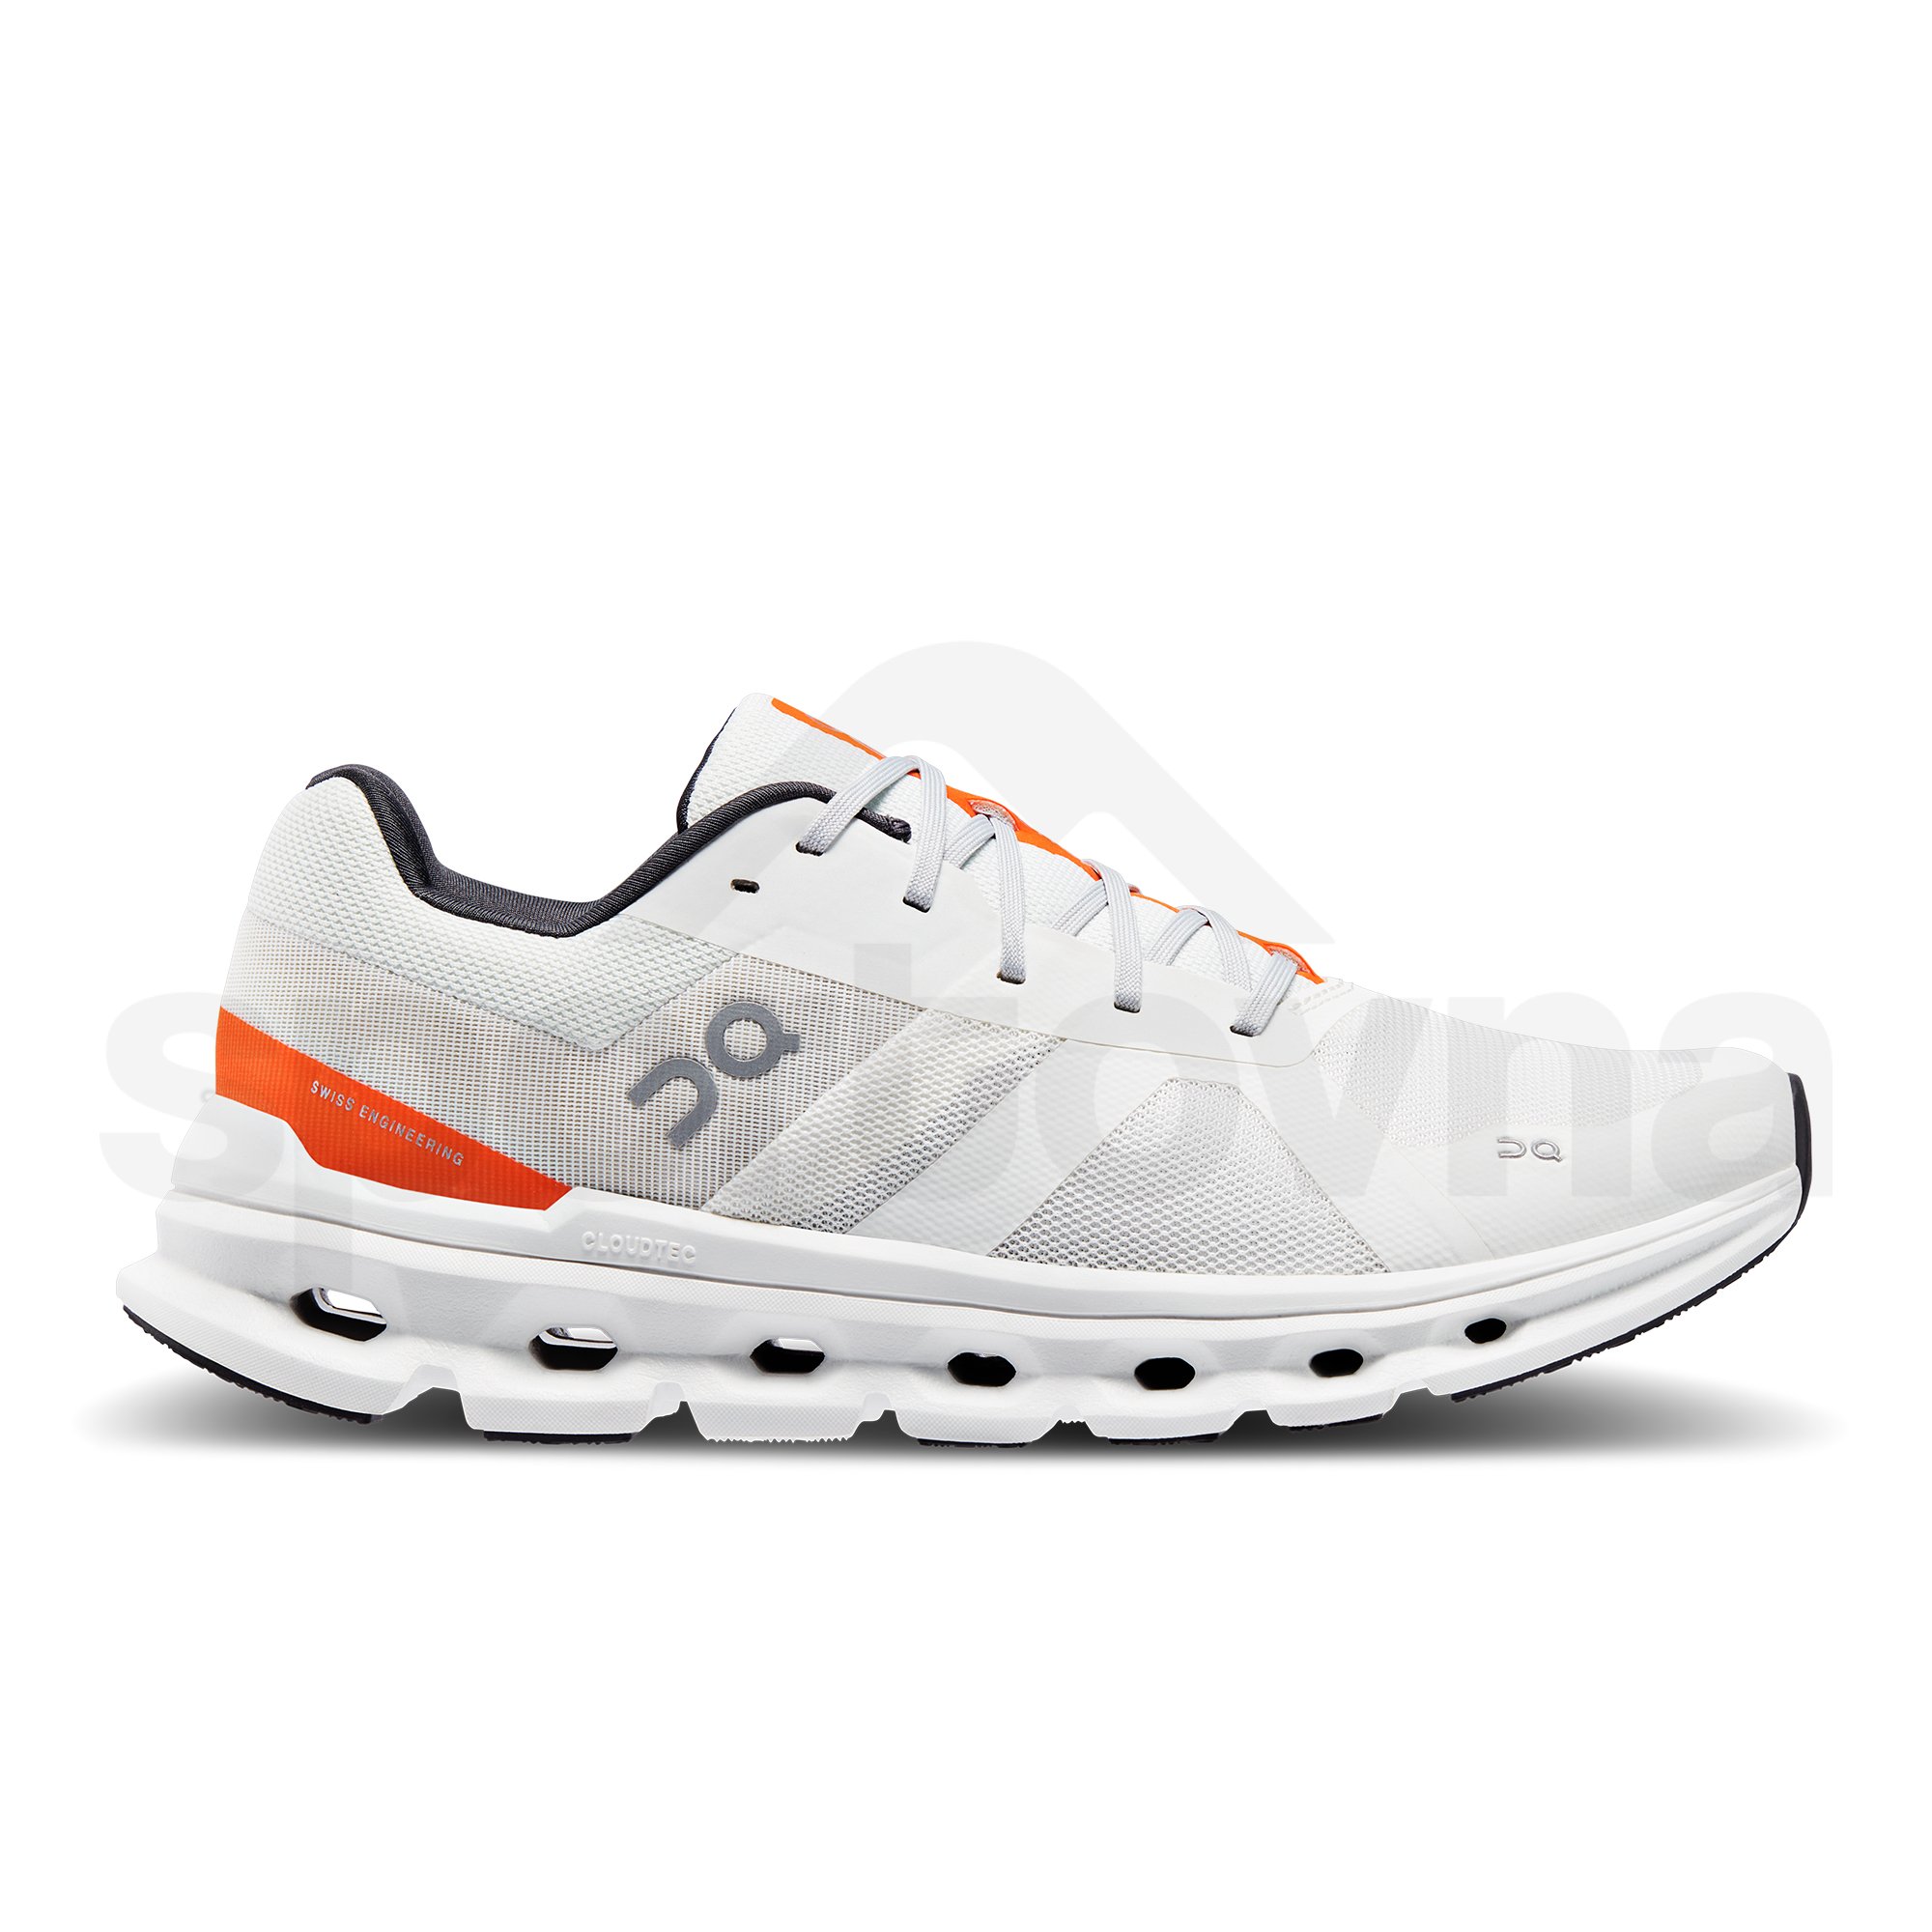 ON-46.98199-cloudrunner-ss23-undyed-white-flame-m-g1.jpg